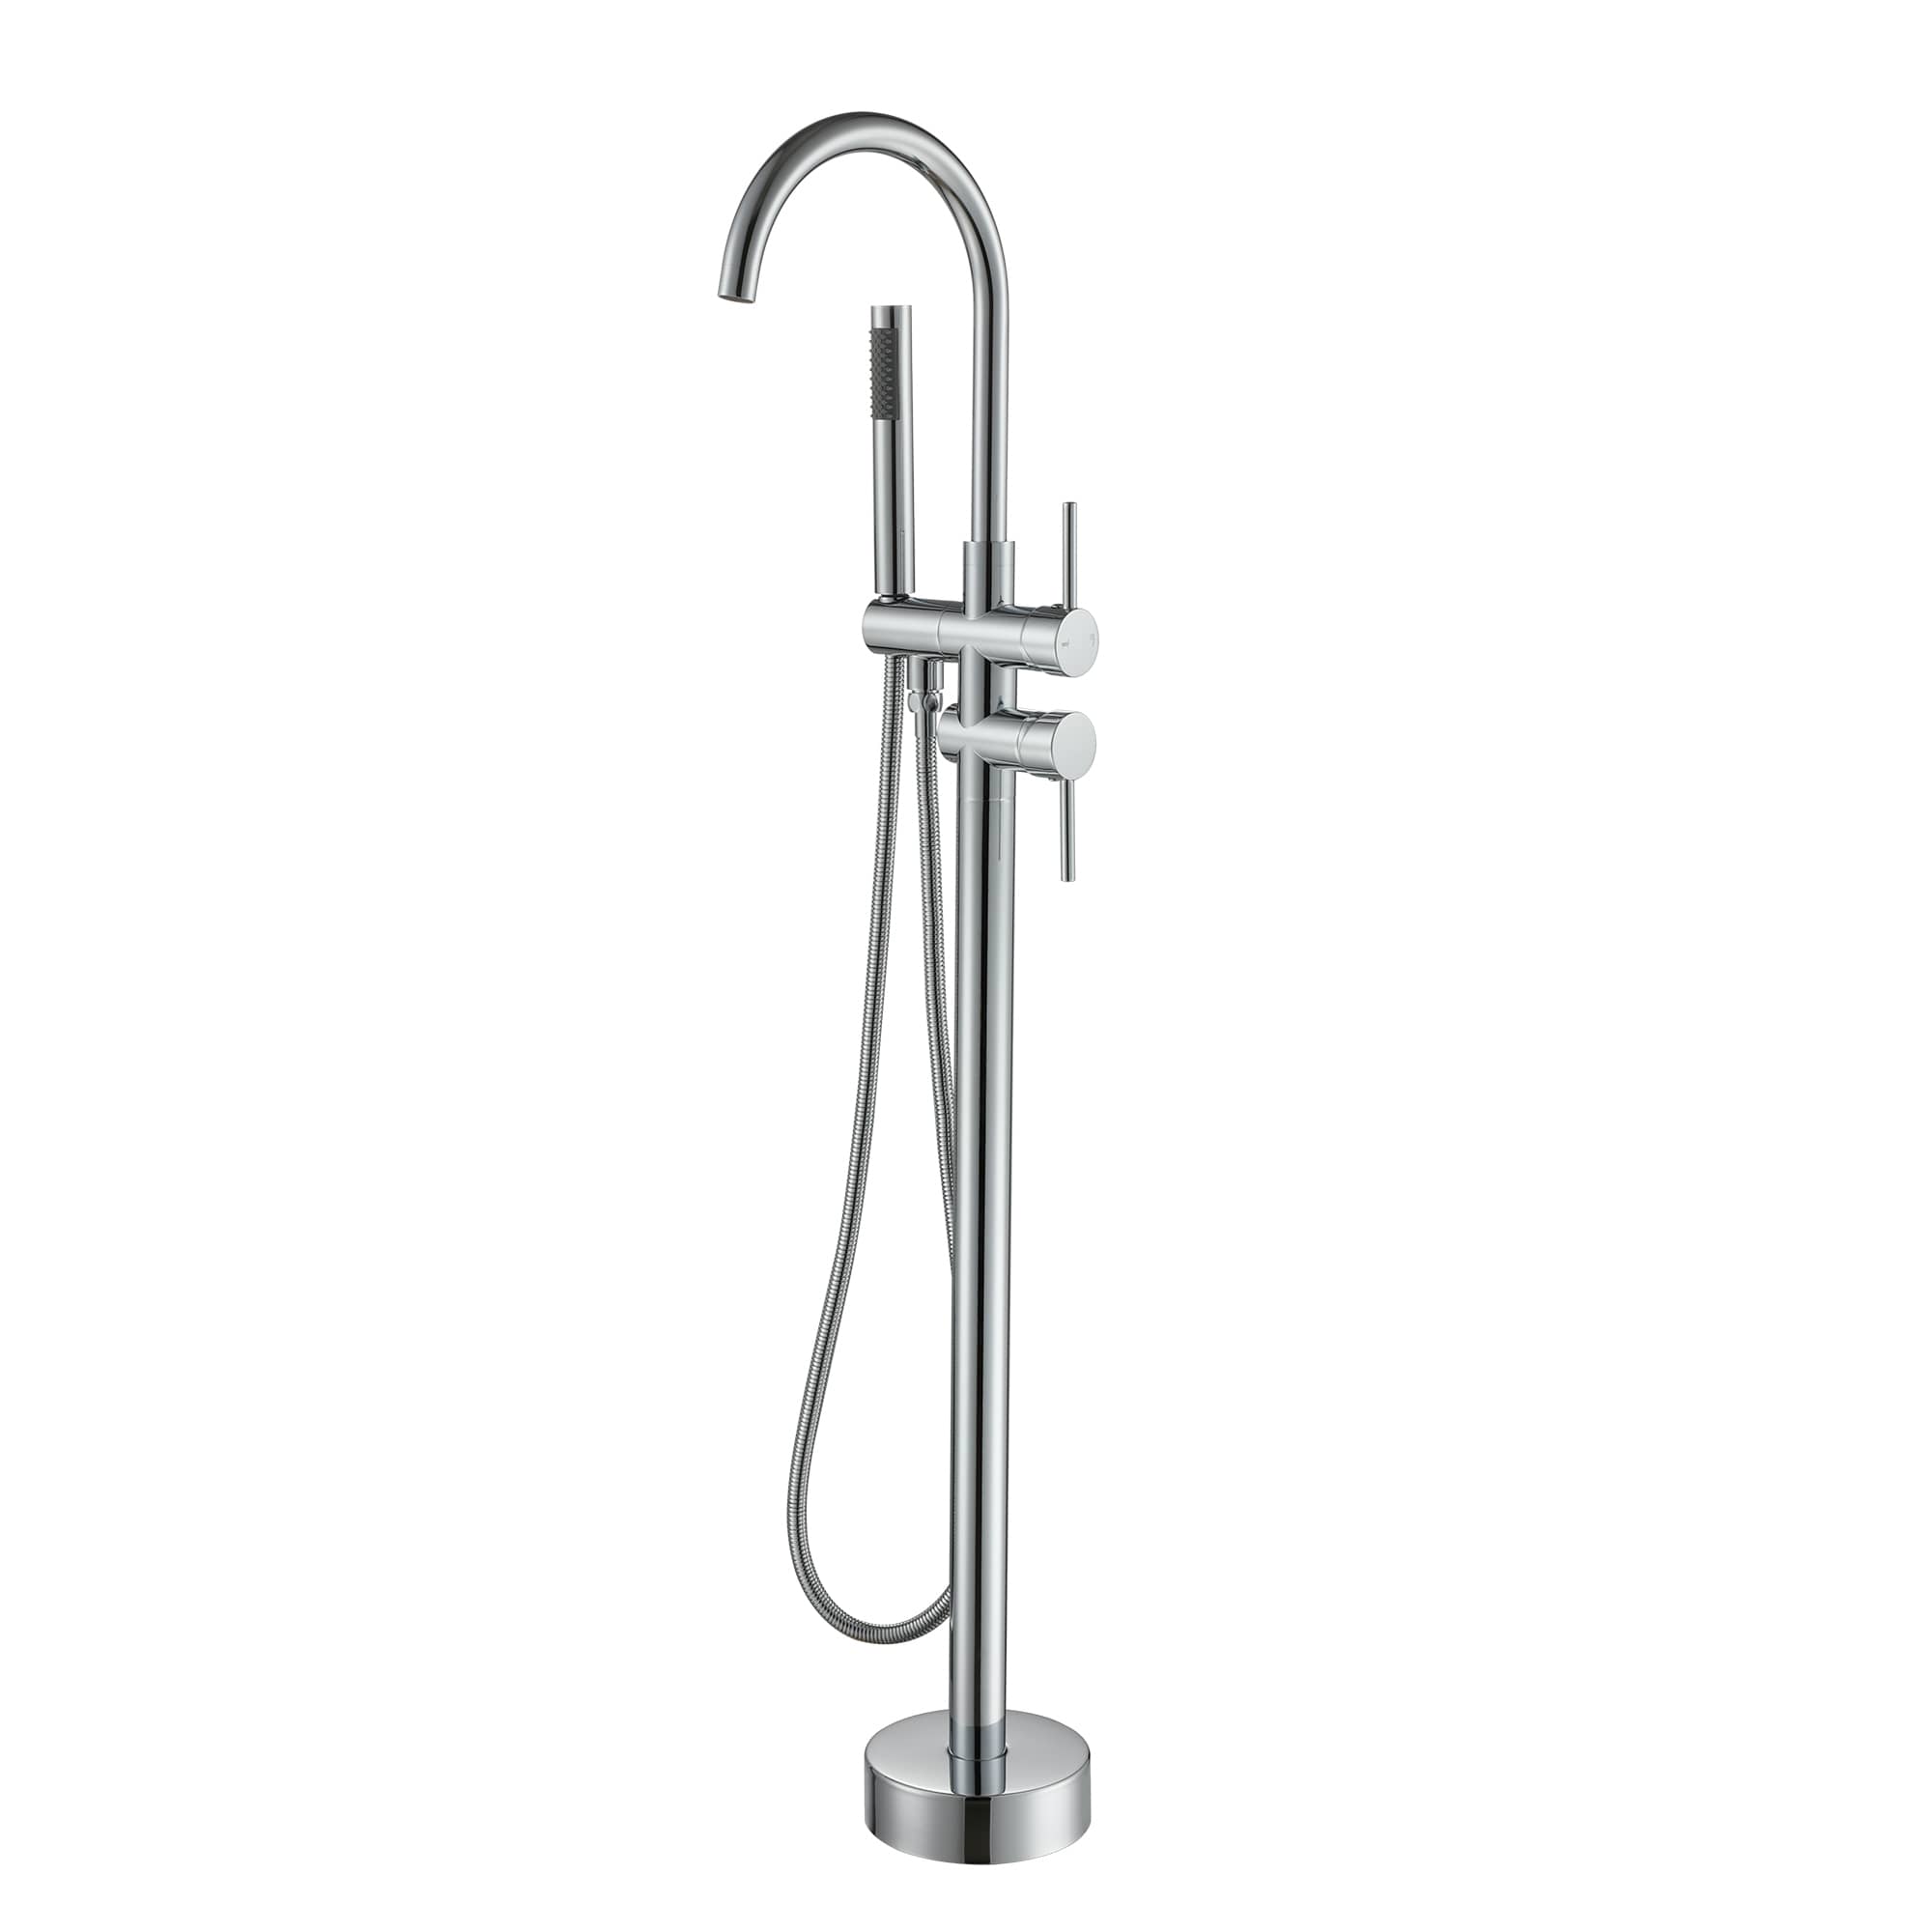 Double-Handles Floor-Mount High Arch Tub Faucet High Flow Bathroom Tub Filler with Handshower